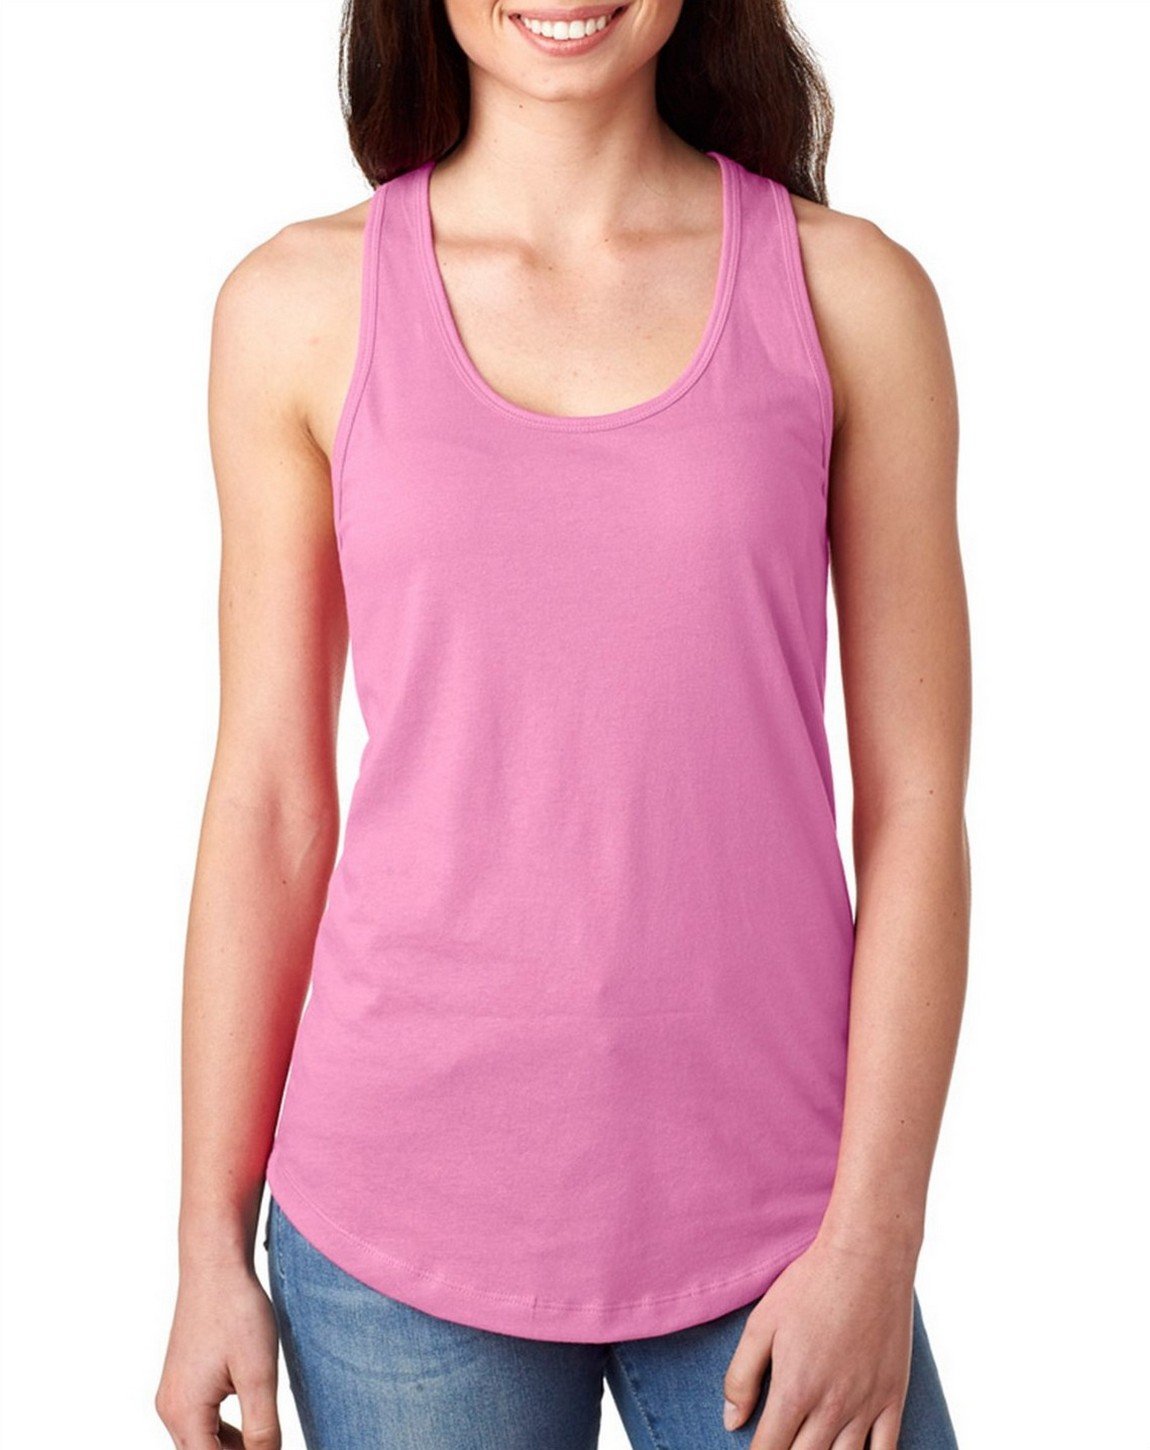 Next Level Ideal Racerback Tank Lilac Large (Pack of 5)